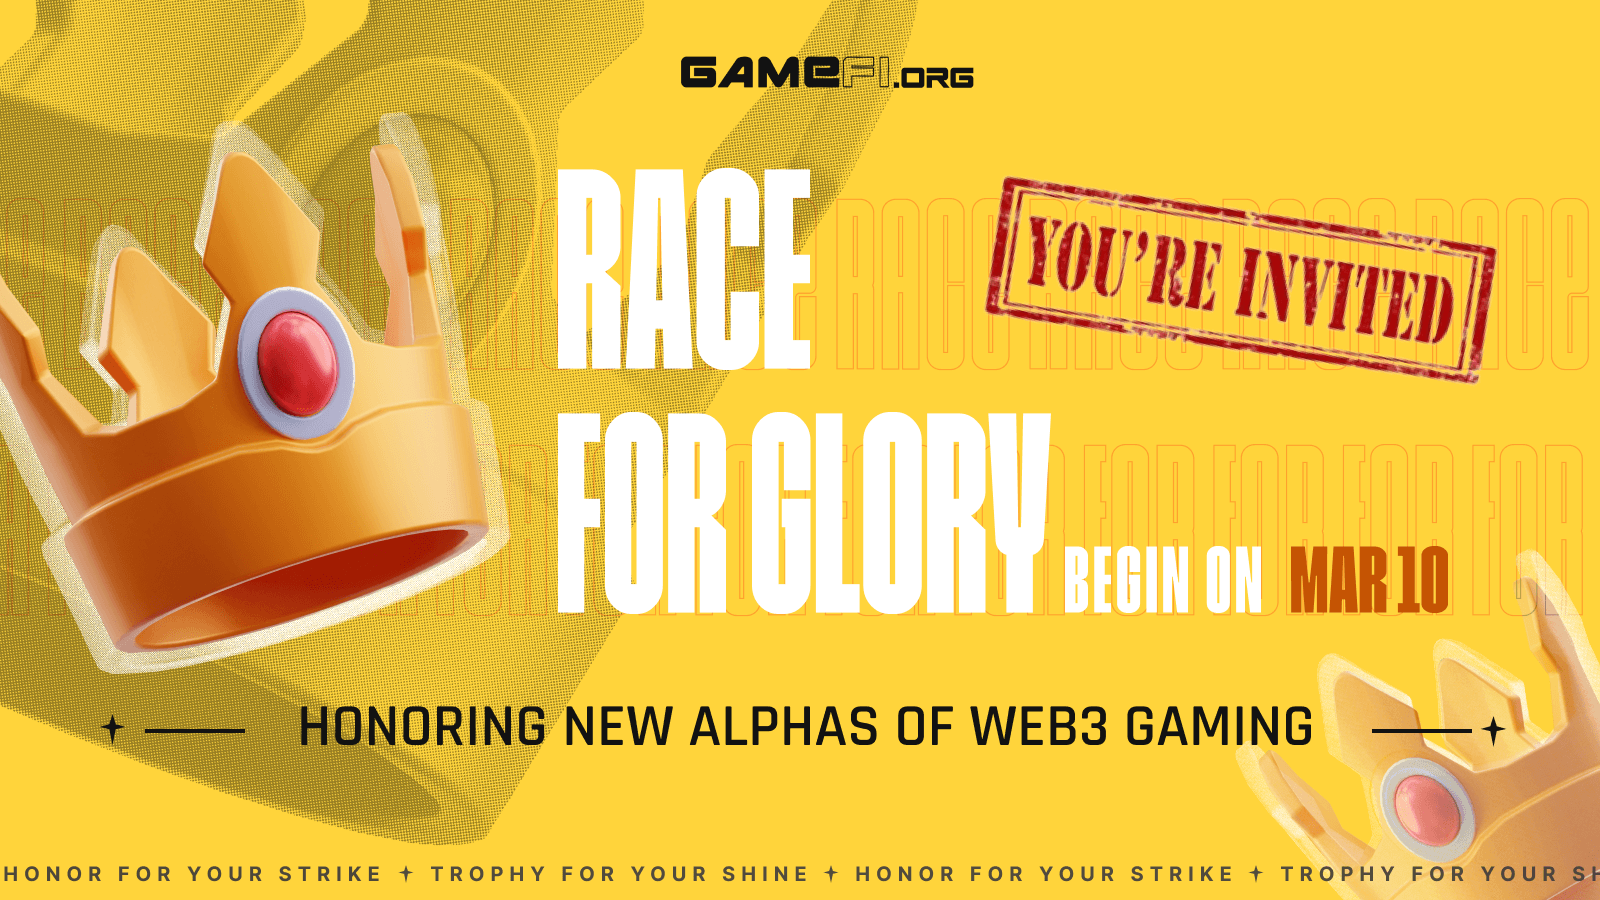 RACE FOR GLORY: Glorious Award for New Alphas of Web3 Gaming Powered by GameFi.org & BNB Chain.